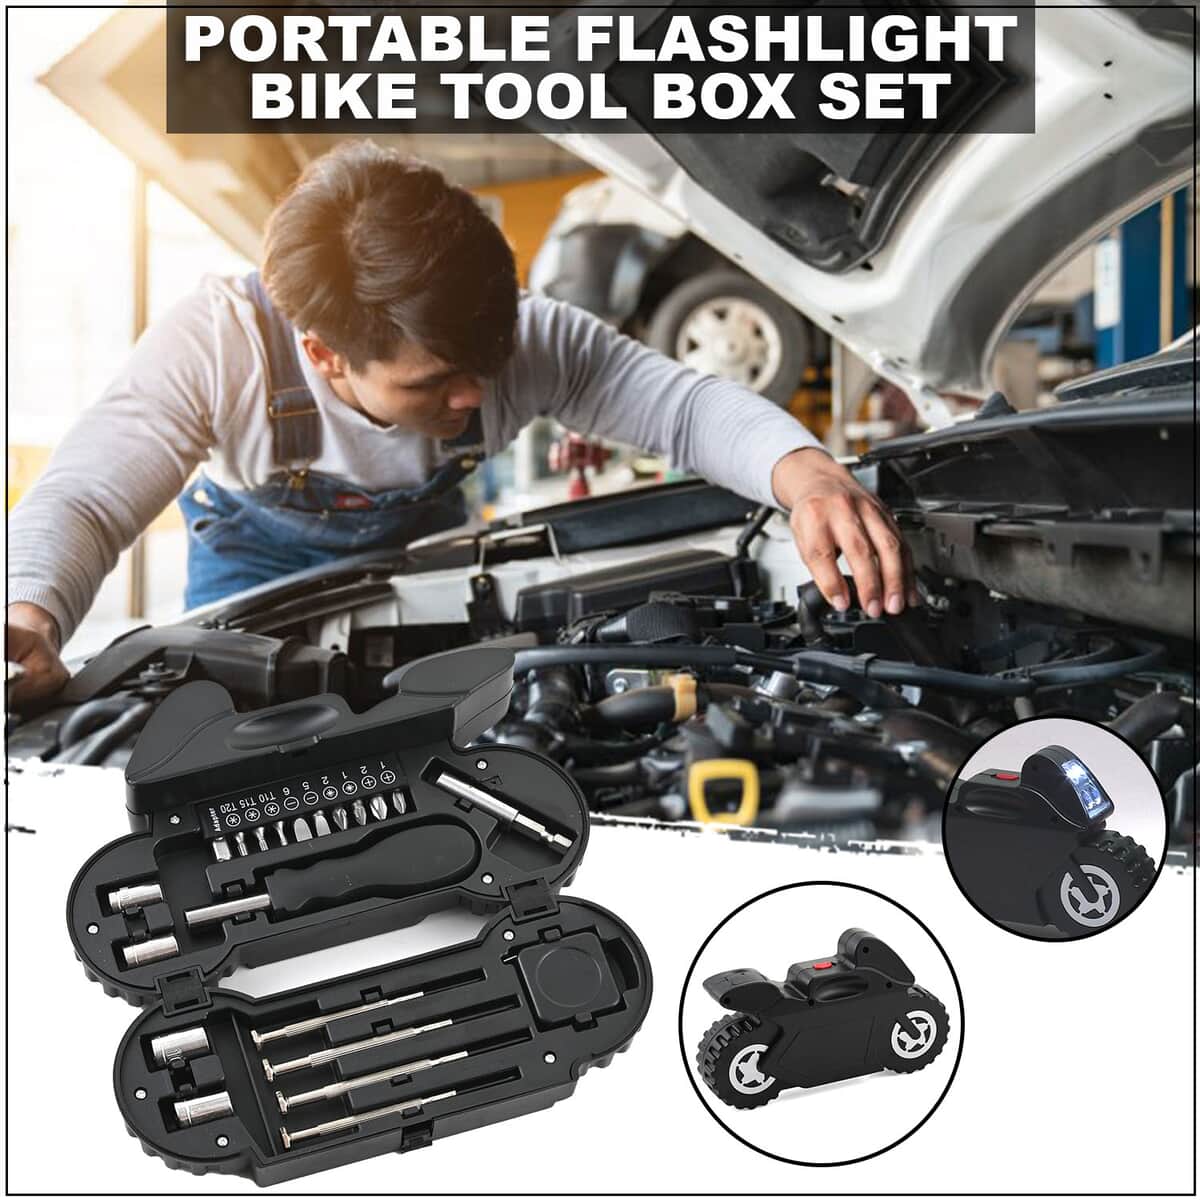 21 Pieces Multi-Functional, Portable, Bike Shaped Complete Repair Tool Kit Set with Battery Operated Flashlight For Home Maintenance, Auto Repair image number 1